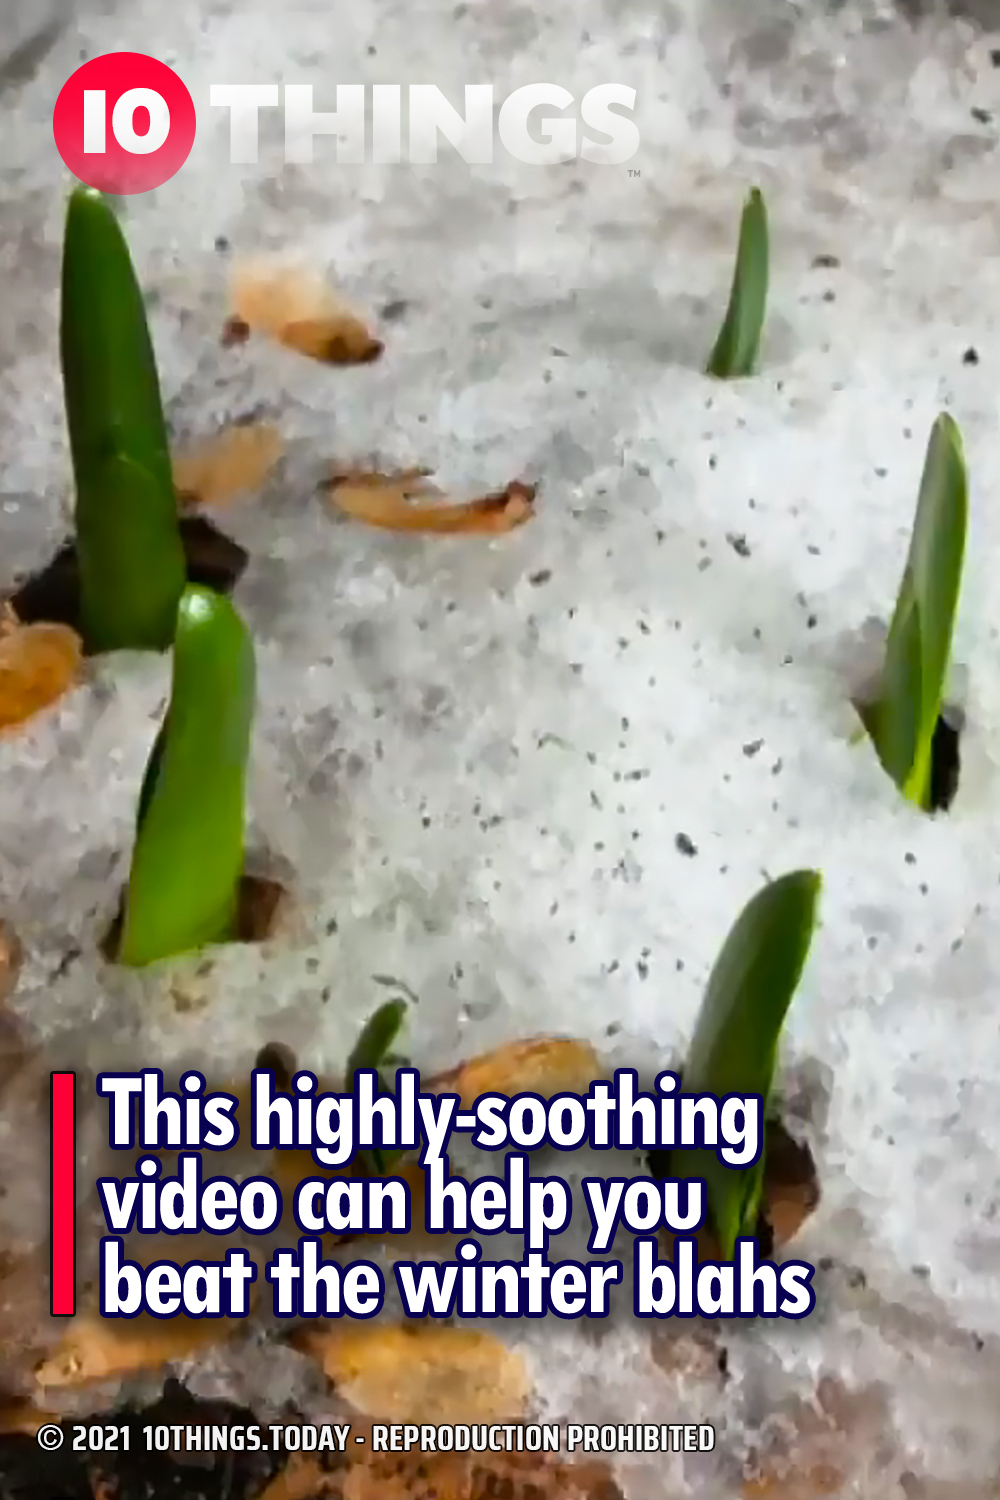 This highly-soothing video can help you beat the winter blahs